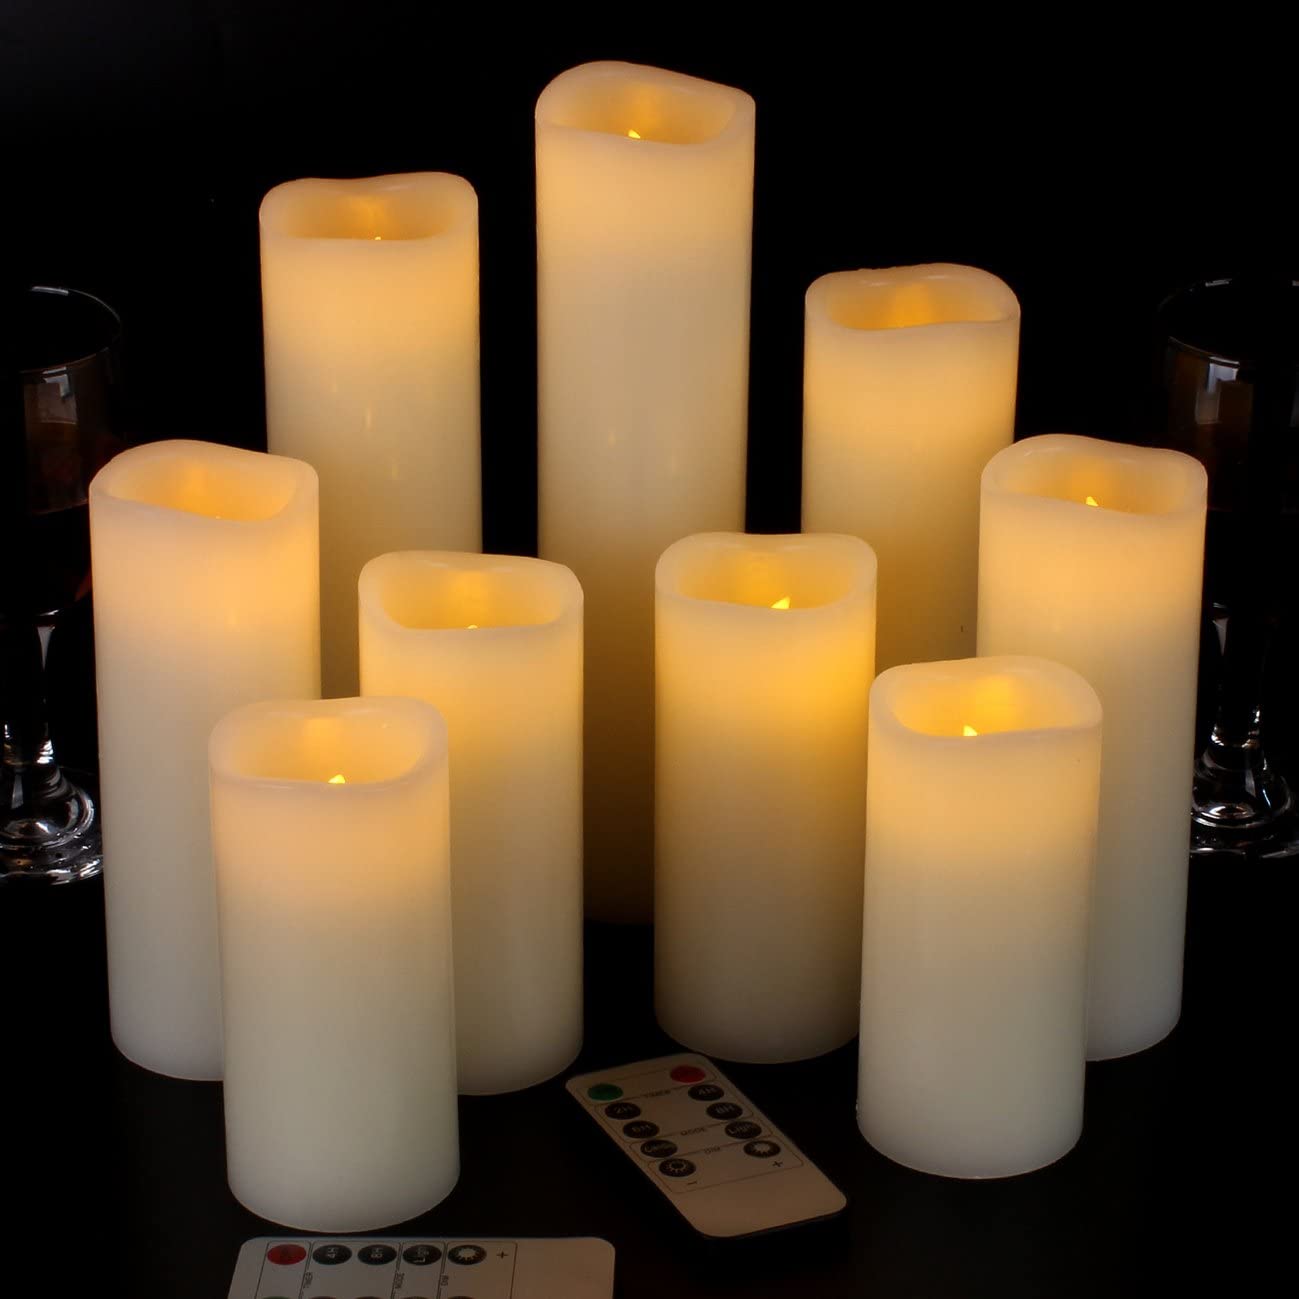 Vinkor Energy Saving Flameless Scented Candles, 9-Pack